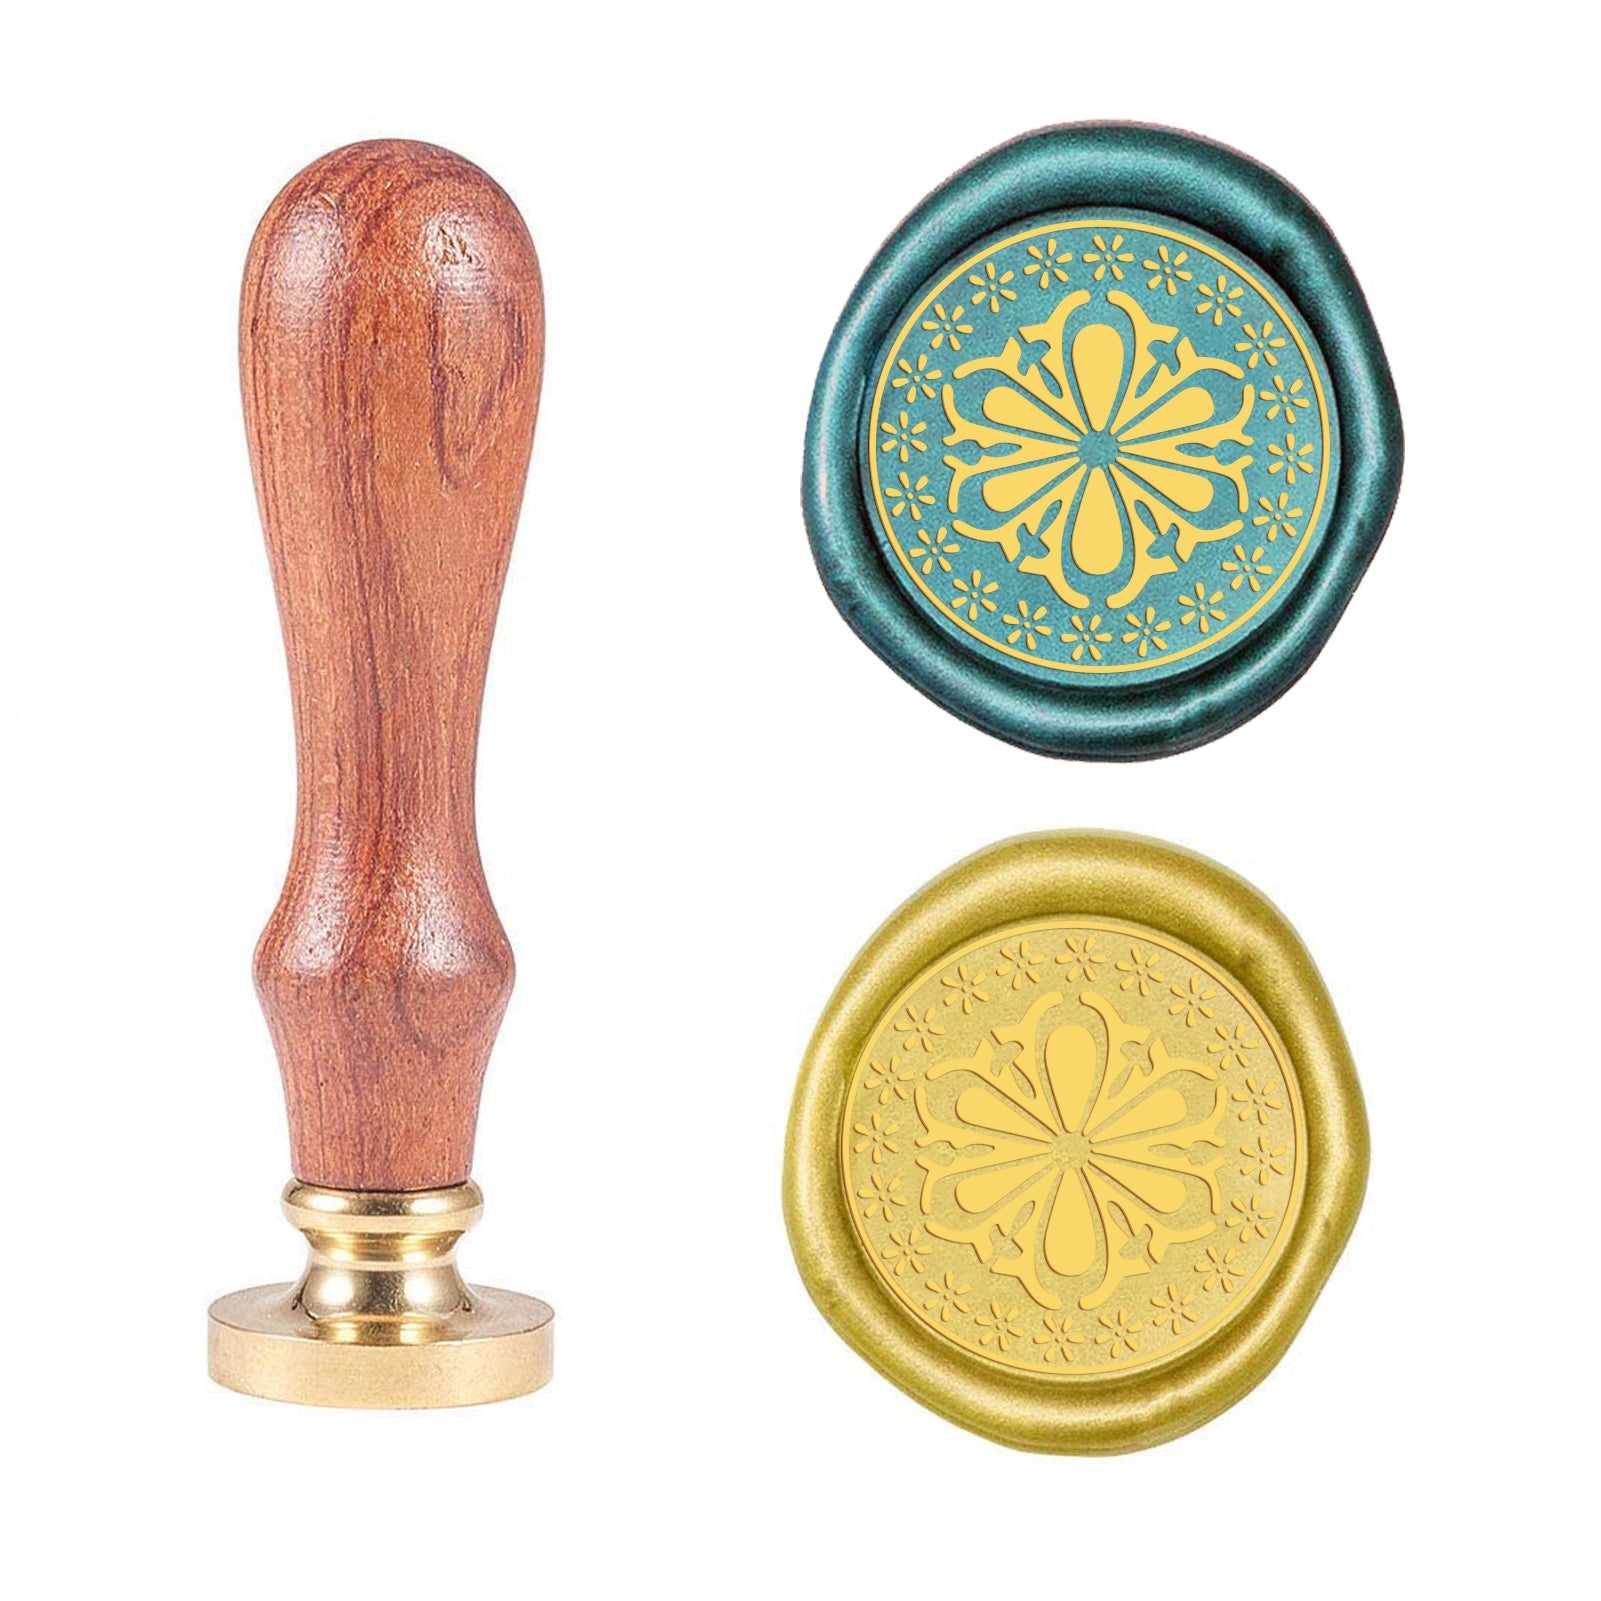 Lace Flower Wood Handle Wax Seal Stamp - CRASPIRE